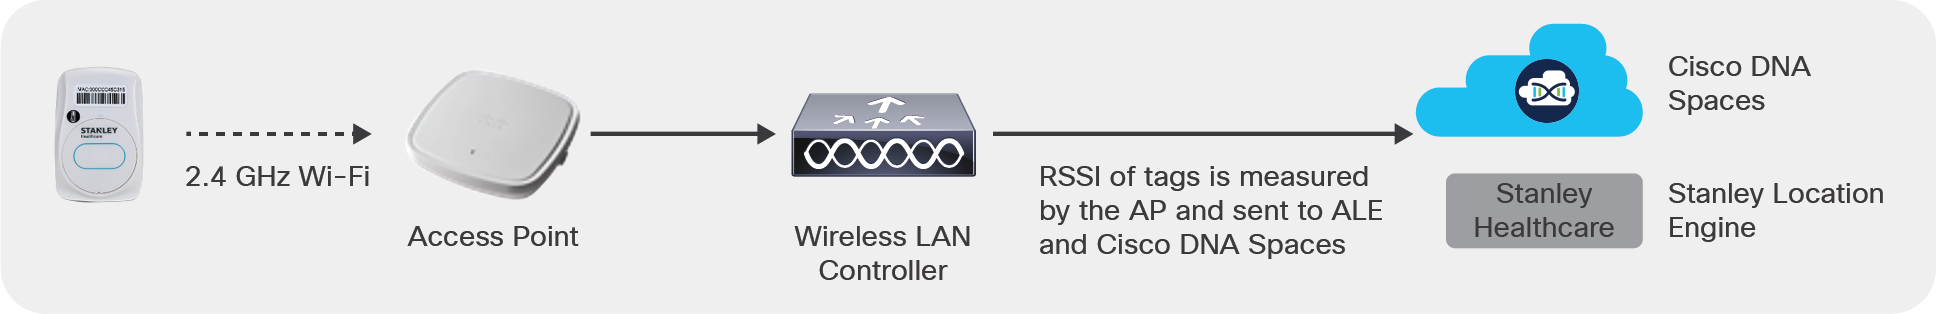 Measuring and reporting the Received Signal Strength Indication (RSSI) to Cisco DNA Spaces and Stanley Aeroscout Location Engine